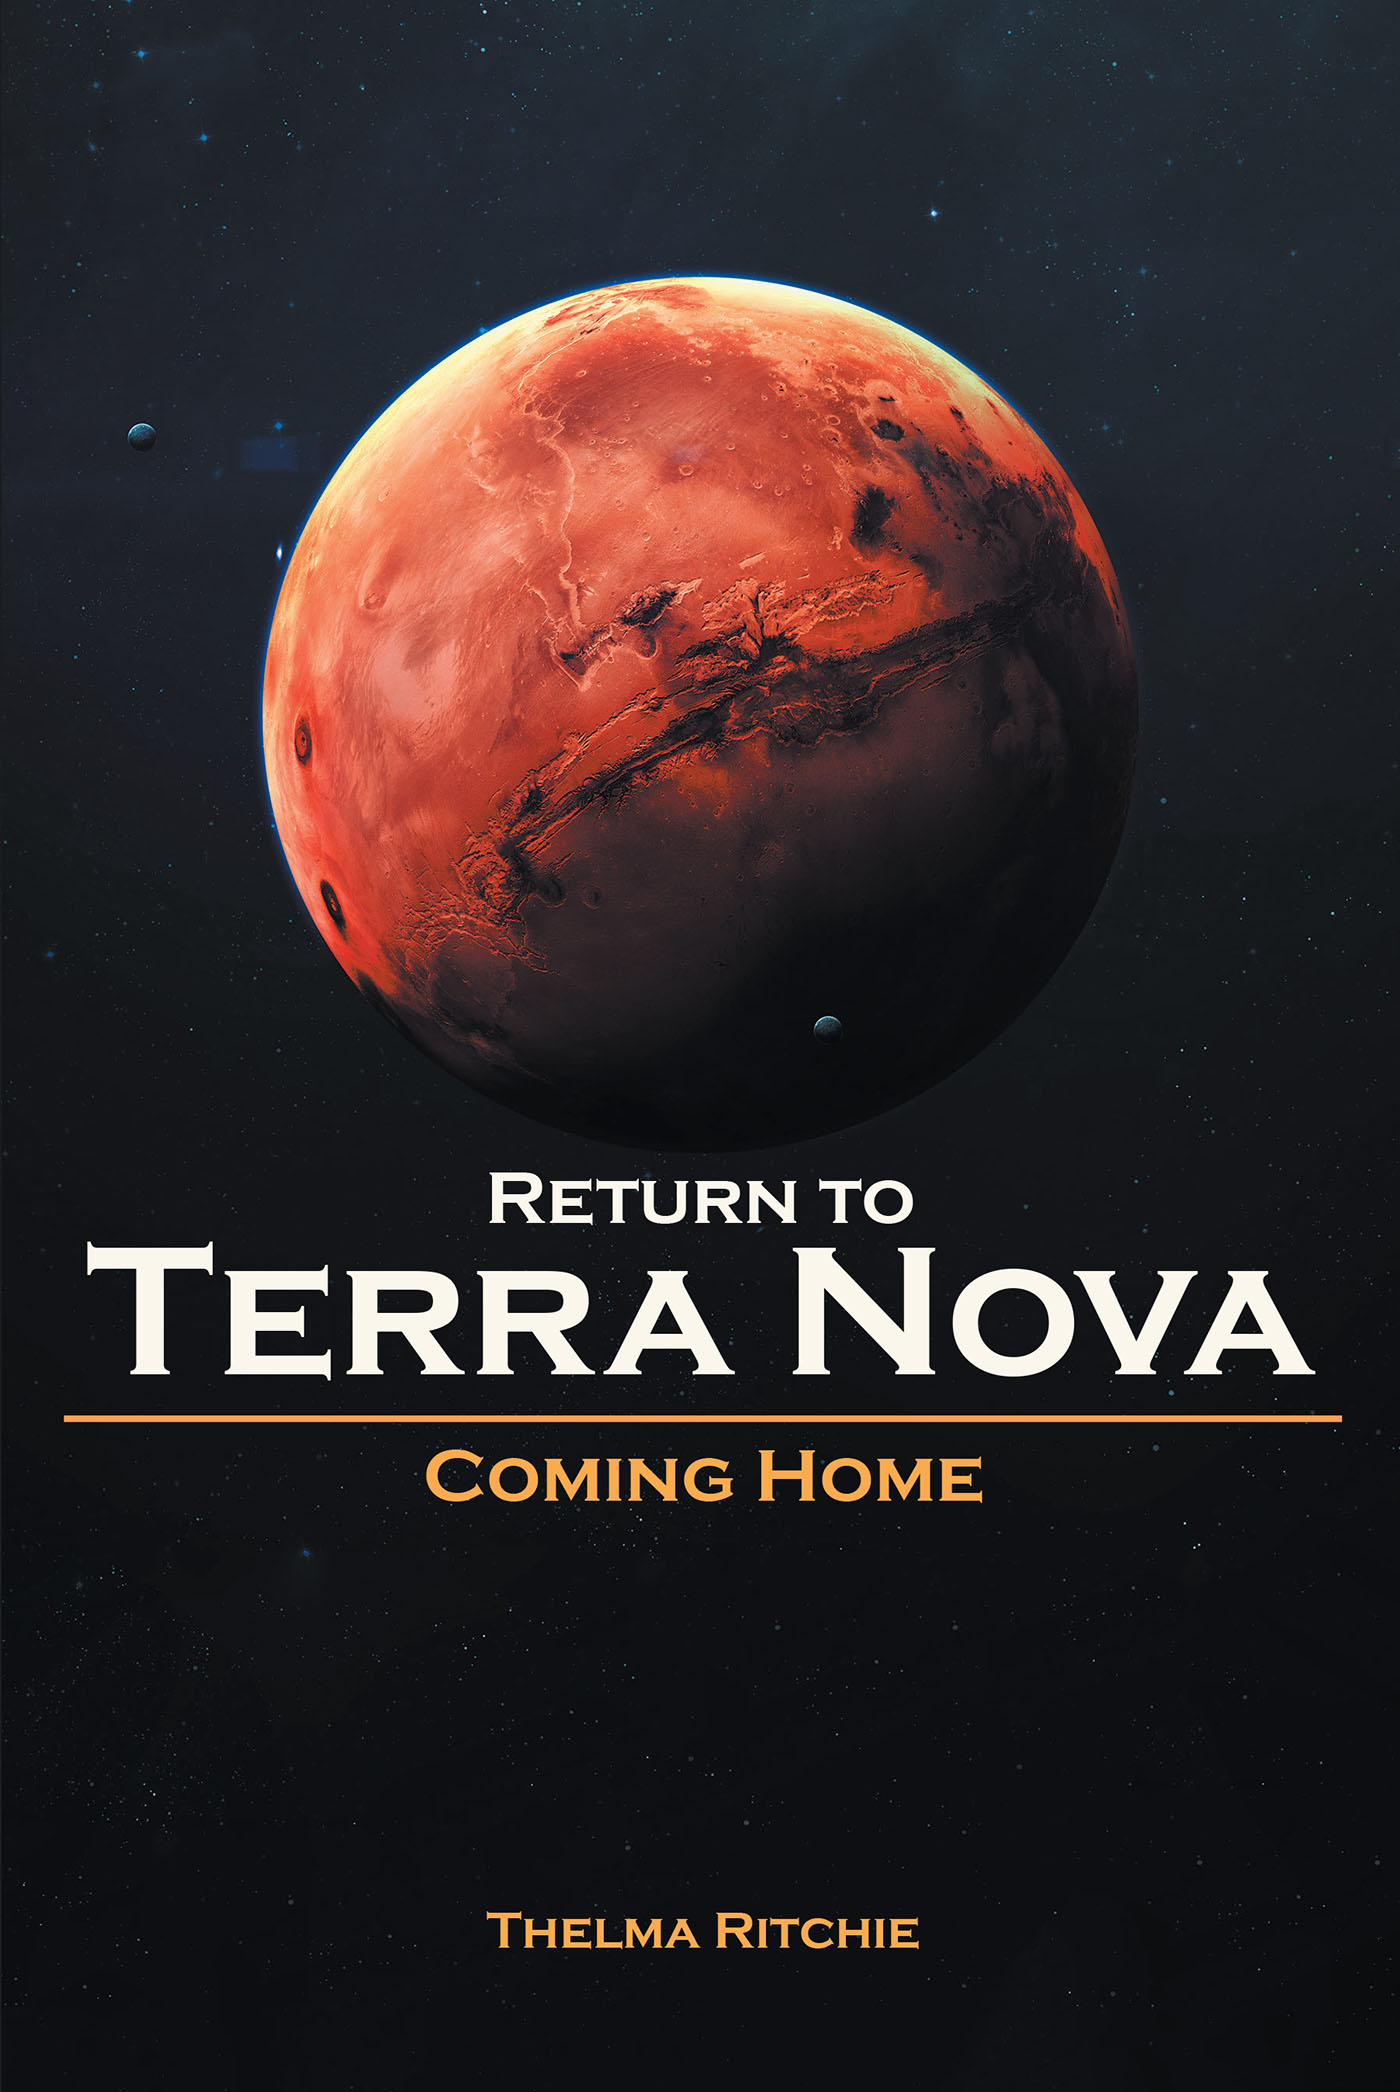 Author Thelma Ritchie’s New Book, "Return to Terra Nova—Coming Home," Delivers Adventure and Realistic Science Packed Into a Story of Faith and Planetary Exploration